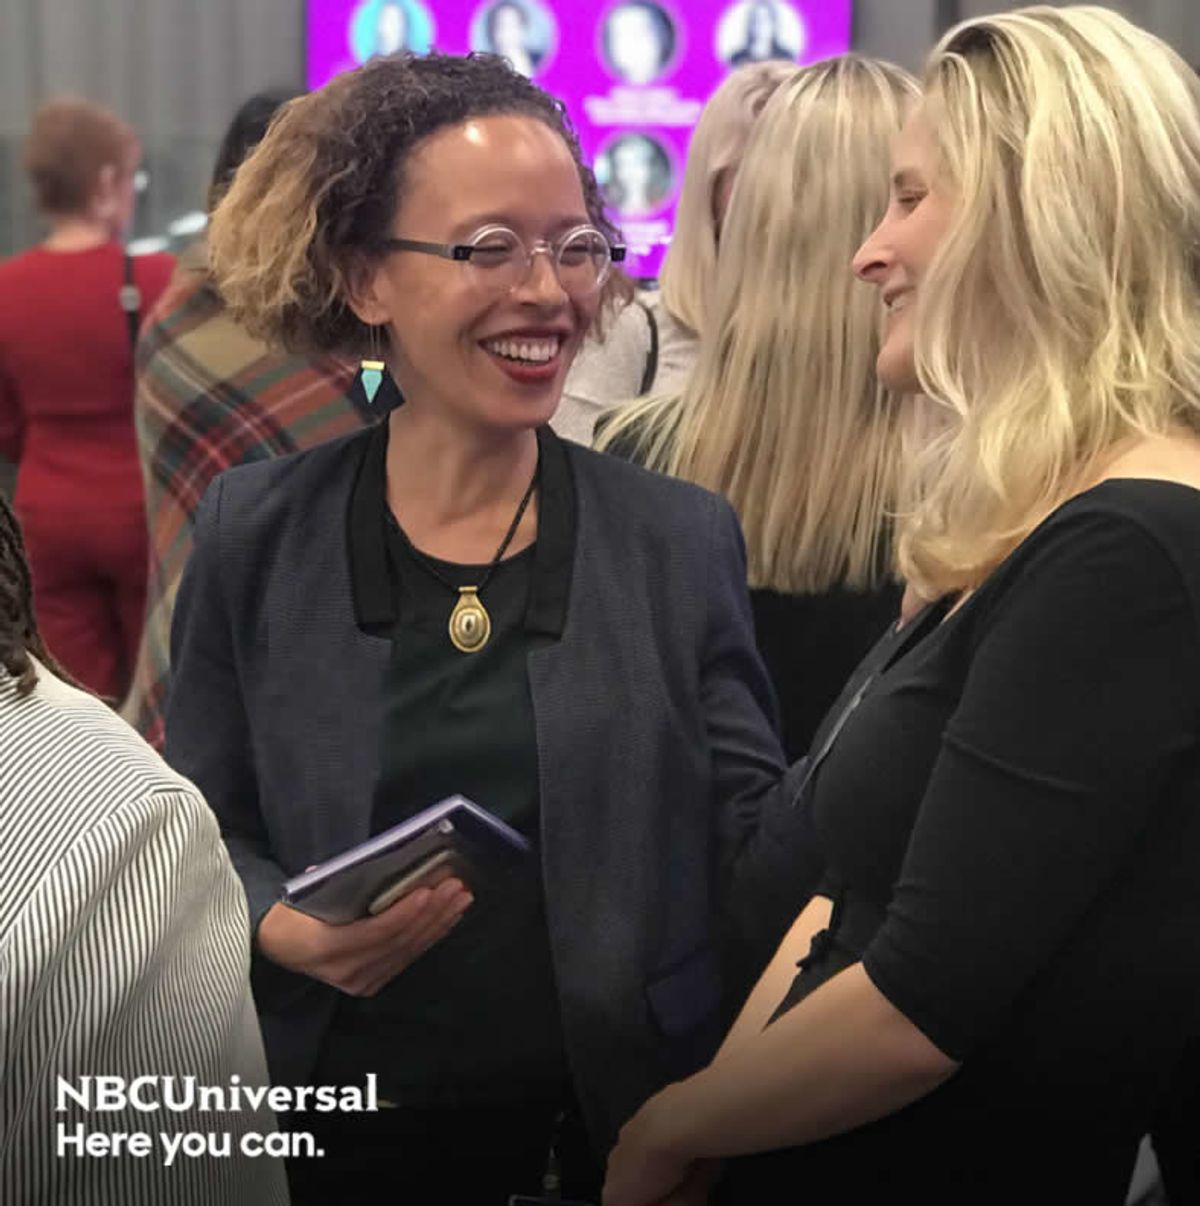 NBCUniversal Ranked #11 In The Country On This Year’s "Best Workplaces For Women" List by Fortune and Great Place to Work